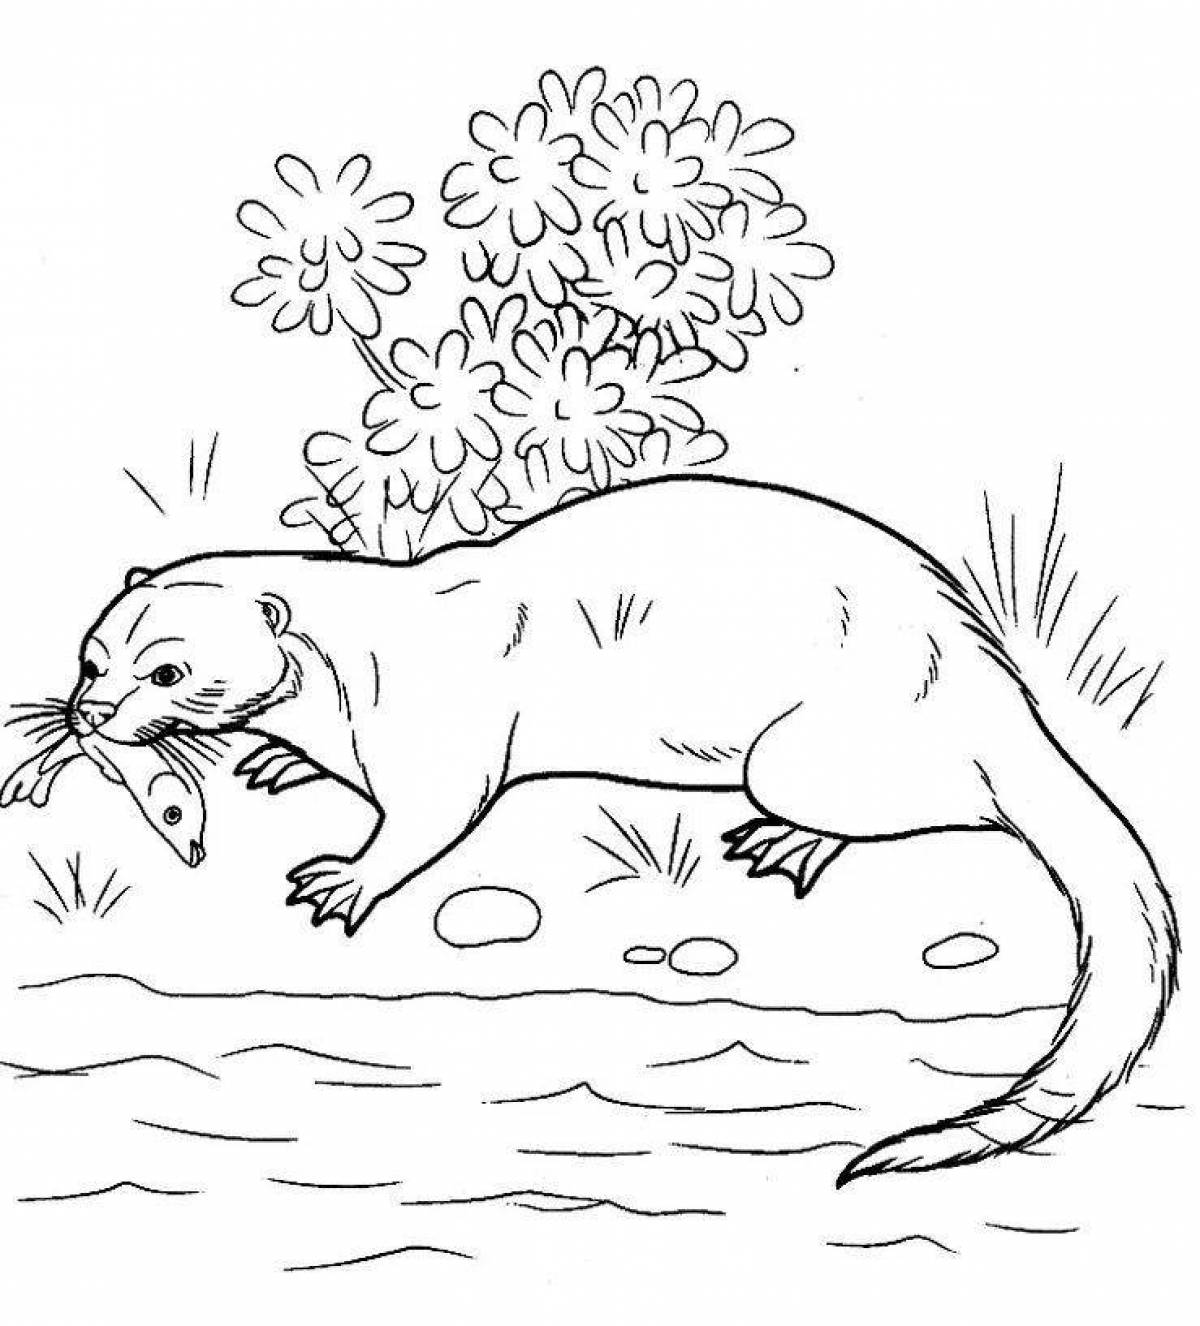 Coloring page happy river otter